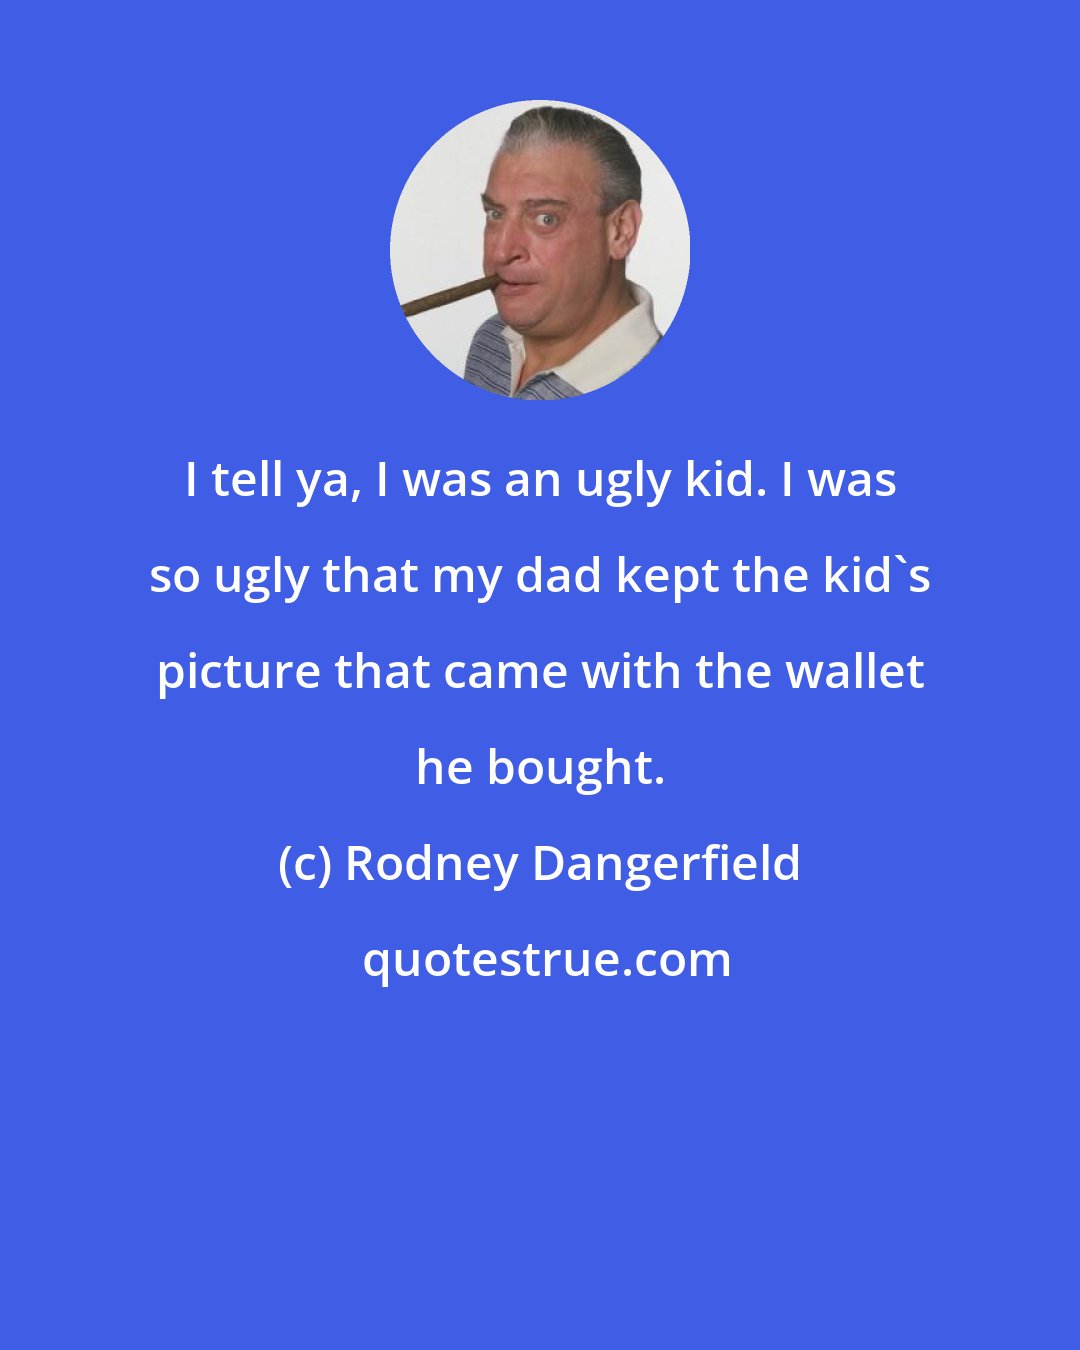 Rodney Dangerfield: I tell ya, I was an ugly kid. I was so ugly that my dad kept the kid's picture that came with the wallet he bought.